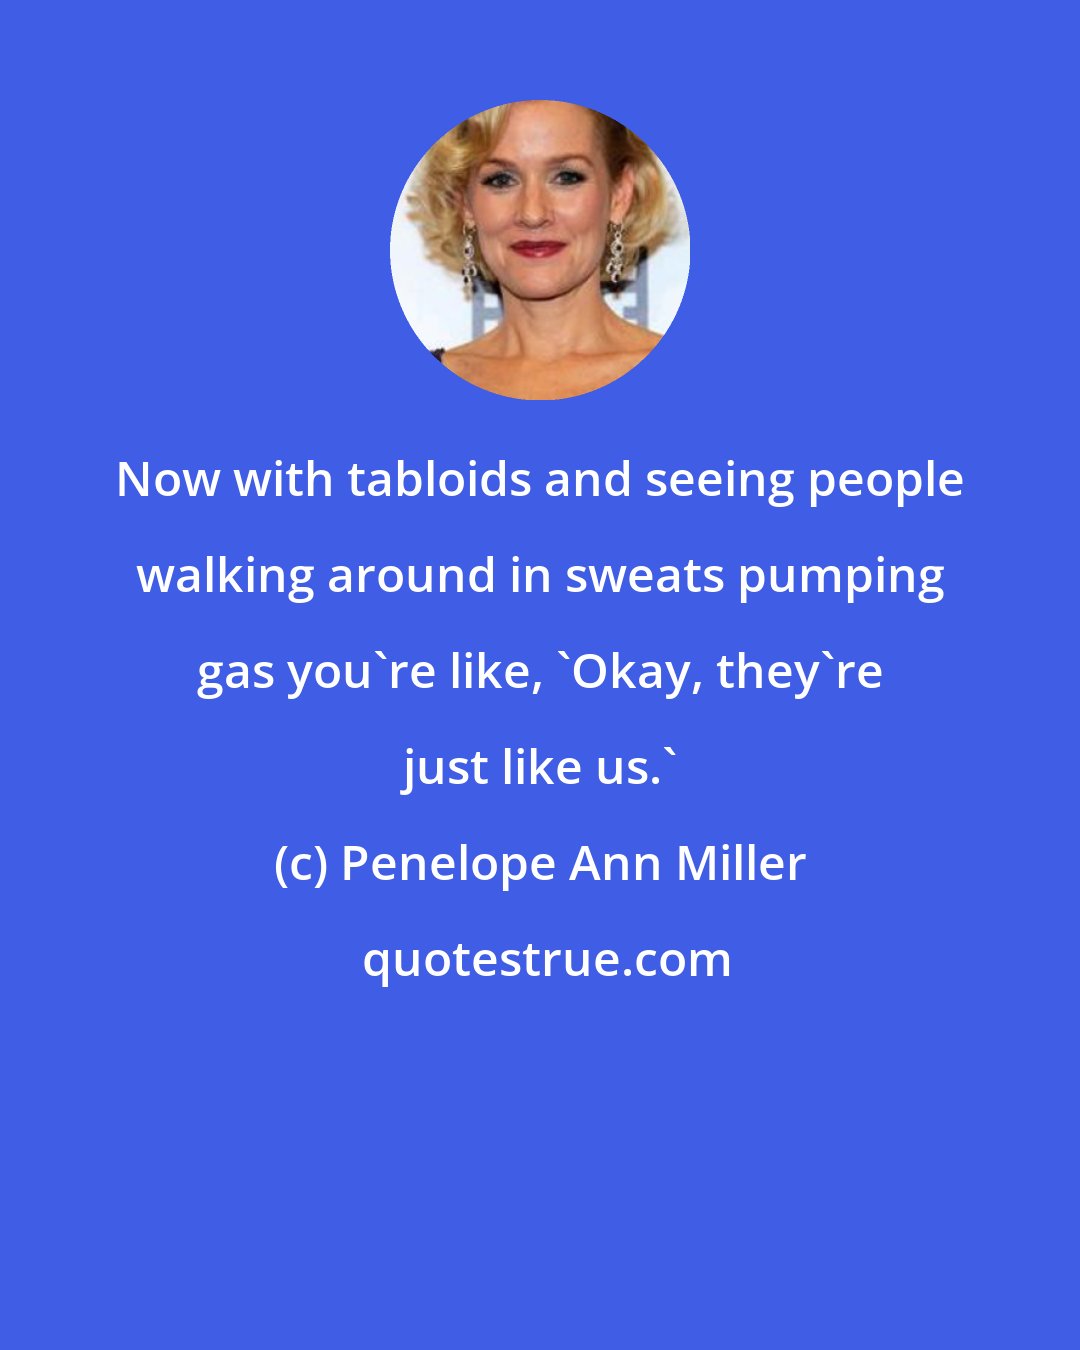 Penelope Ann Miller: Now with tabloids and seeing people walking around in sweats pumping gas you're like, 'Okay, they're just like us.'